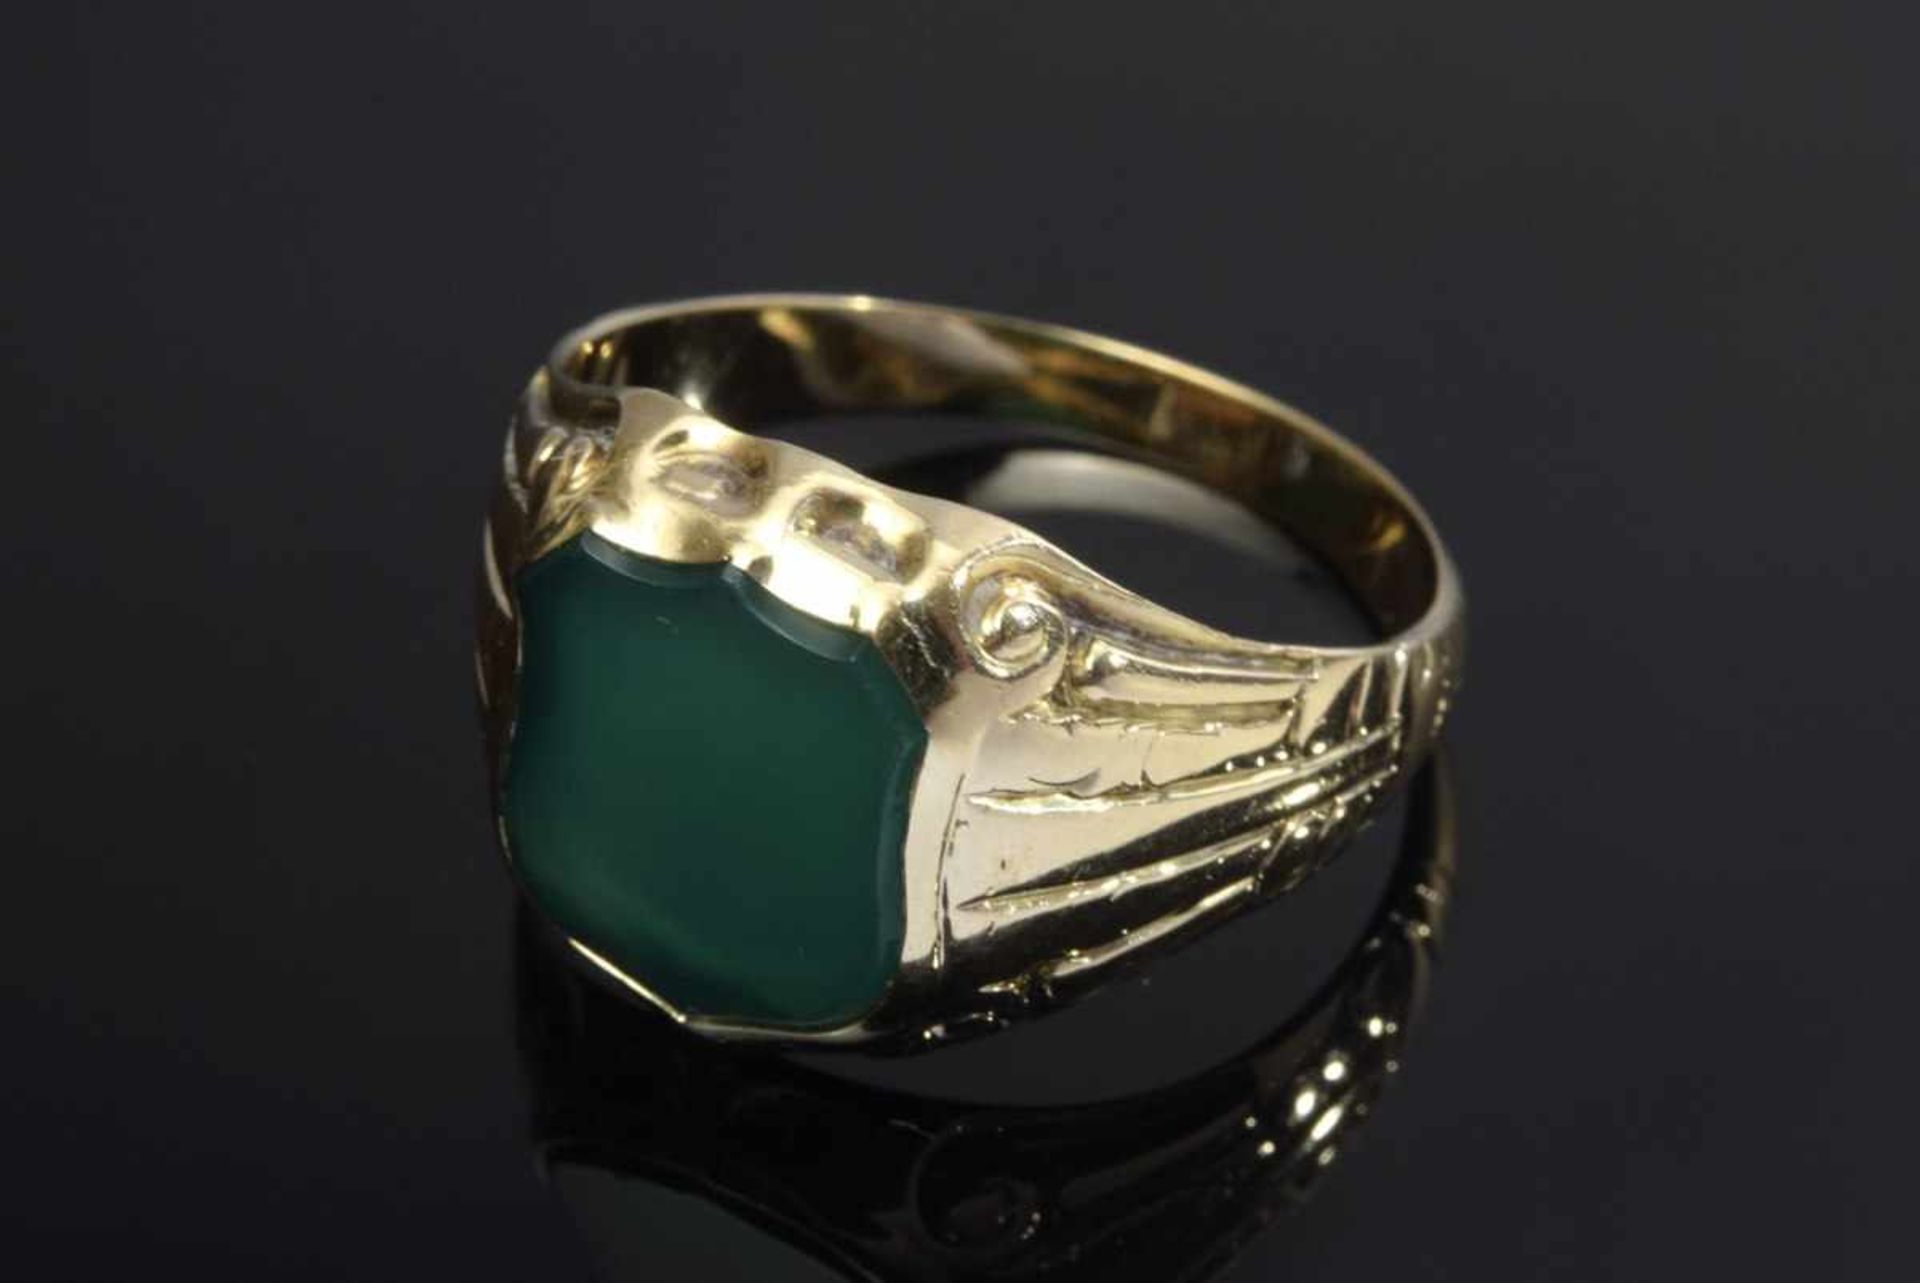 GG 585 Seal ring with plate of green coloured agate in heraldic cartouche form, 6,5g, size 66GG - Bild 2 aus 3